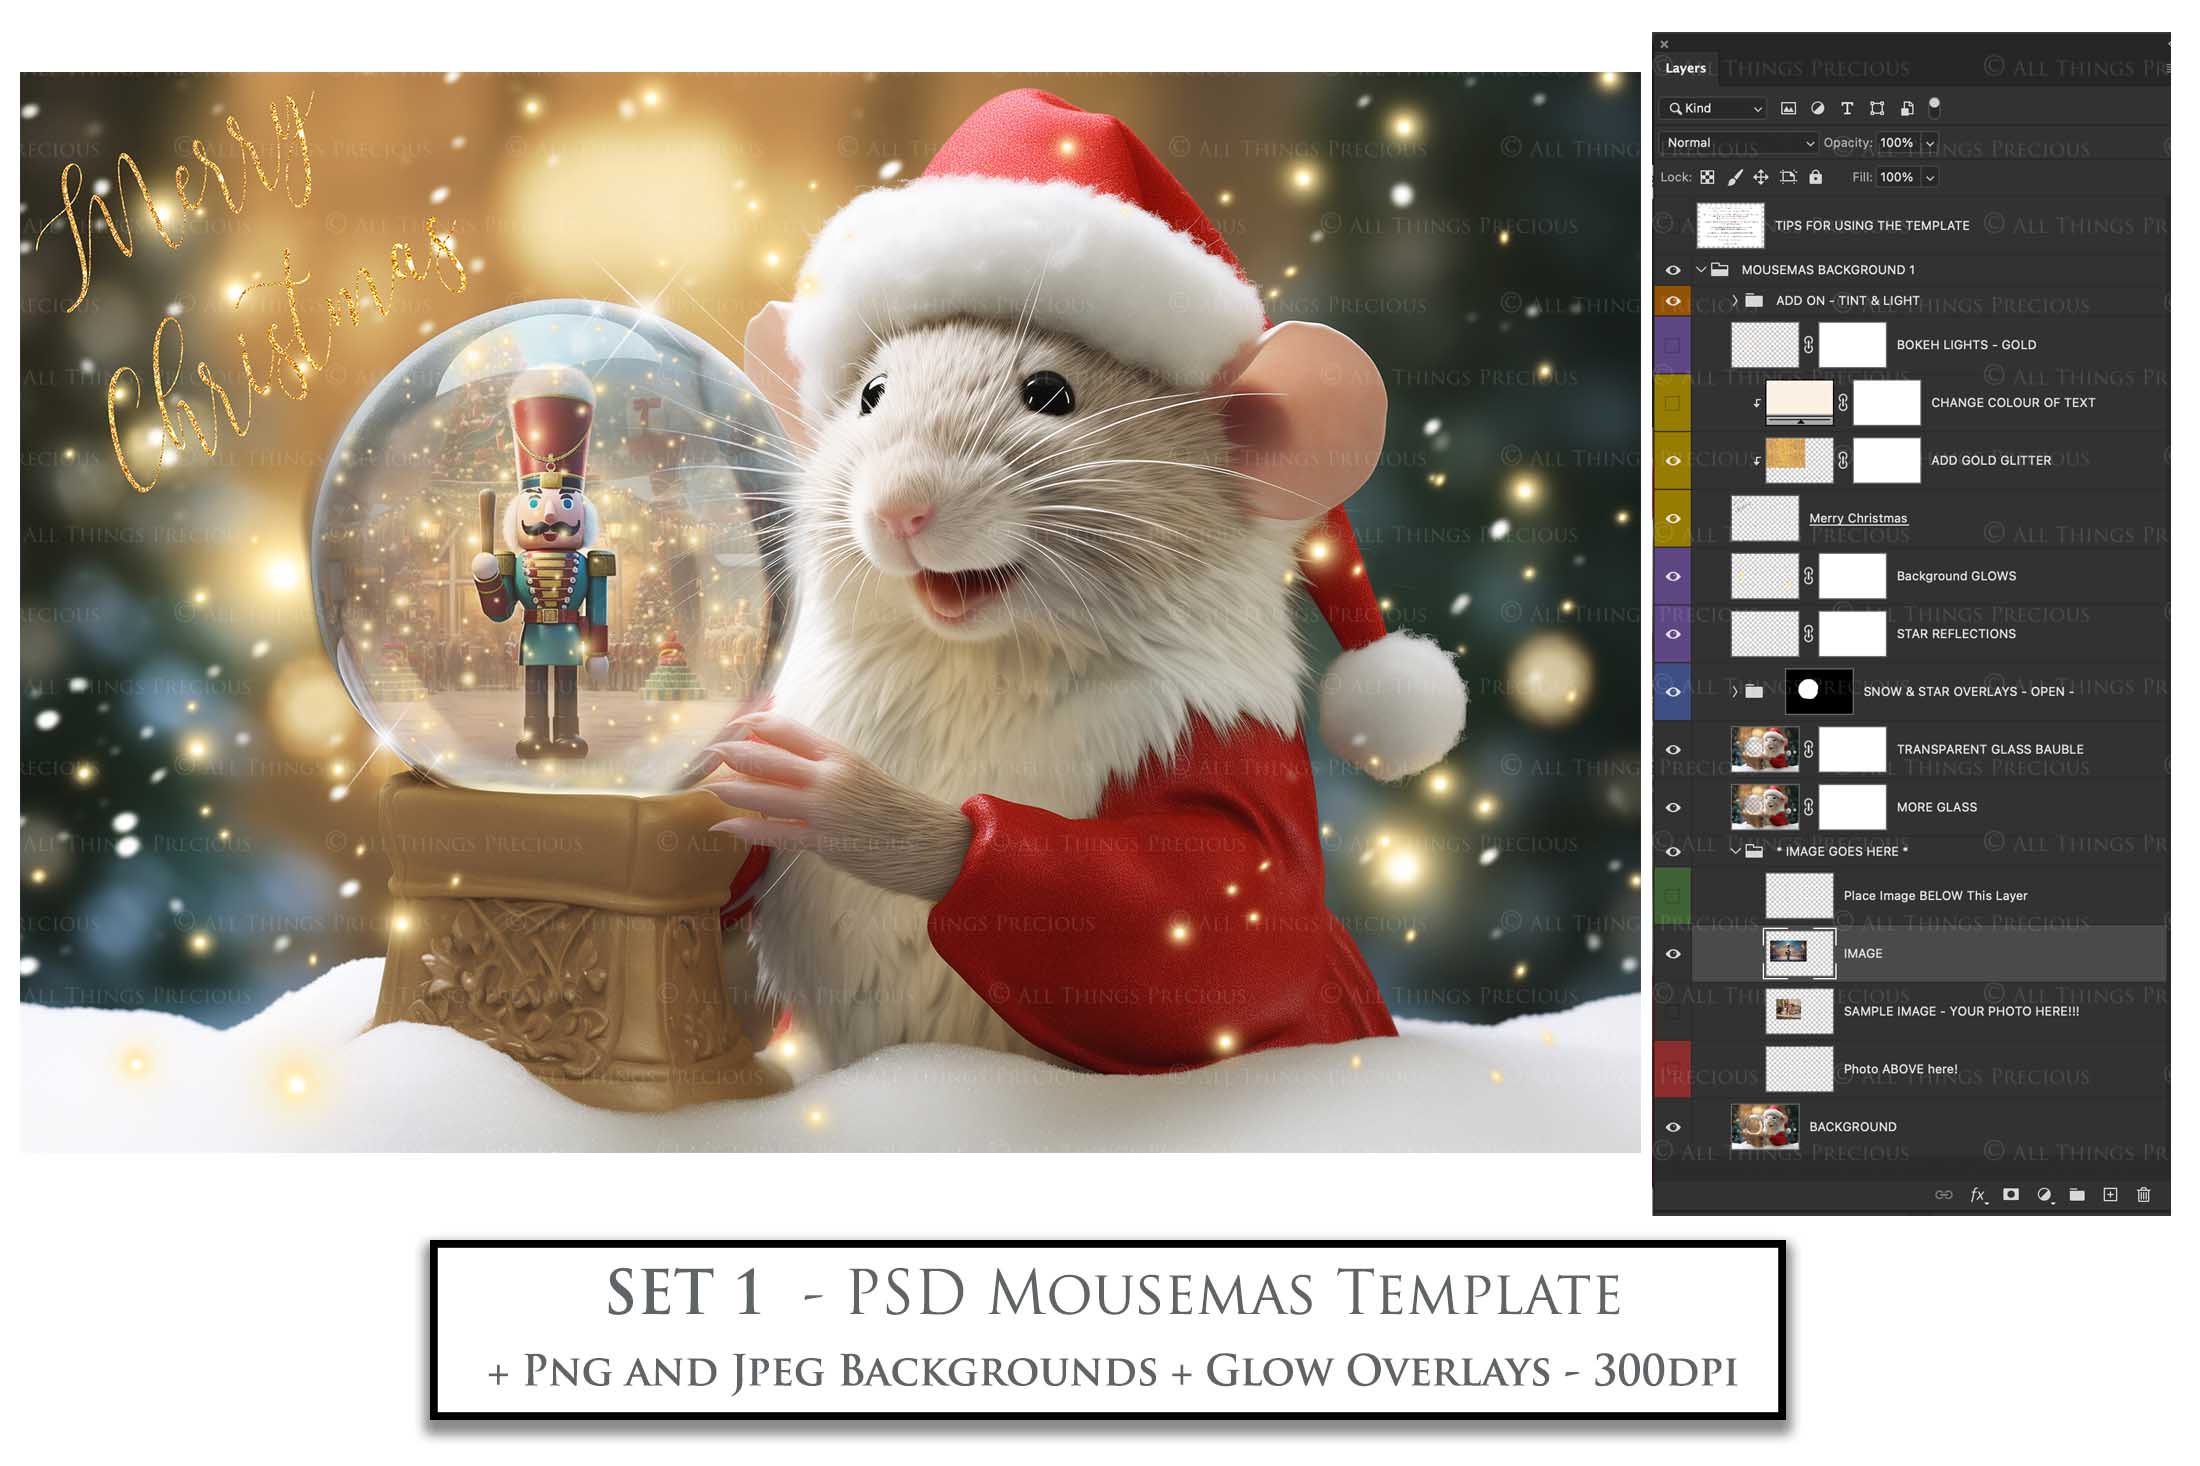 Digital Snow Globe Background. Png snow and glow overlays with PSD Template. The globe is transparent, perfect for adding your own images and retain the glass  effect. Nutcracker Mouse Christmas. The file is 6000 x 4000, 300dpi. Png Included. Use for Xmas edits, Photography, Card Crafts, Scrapbooking. ATP Textures